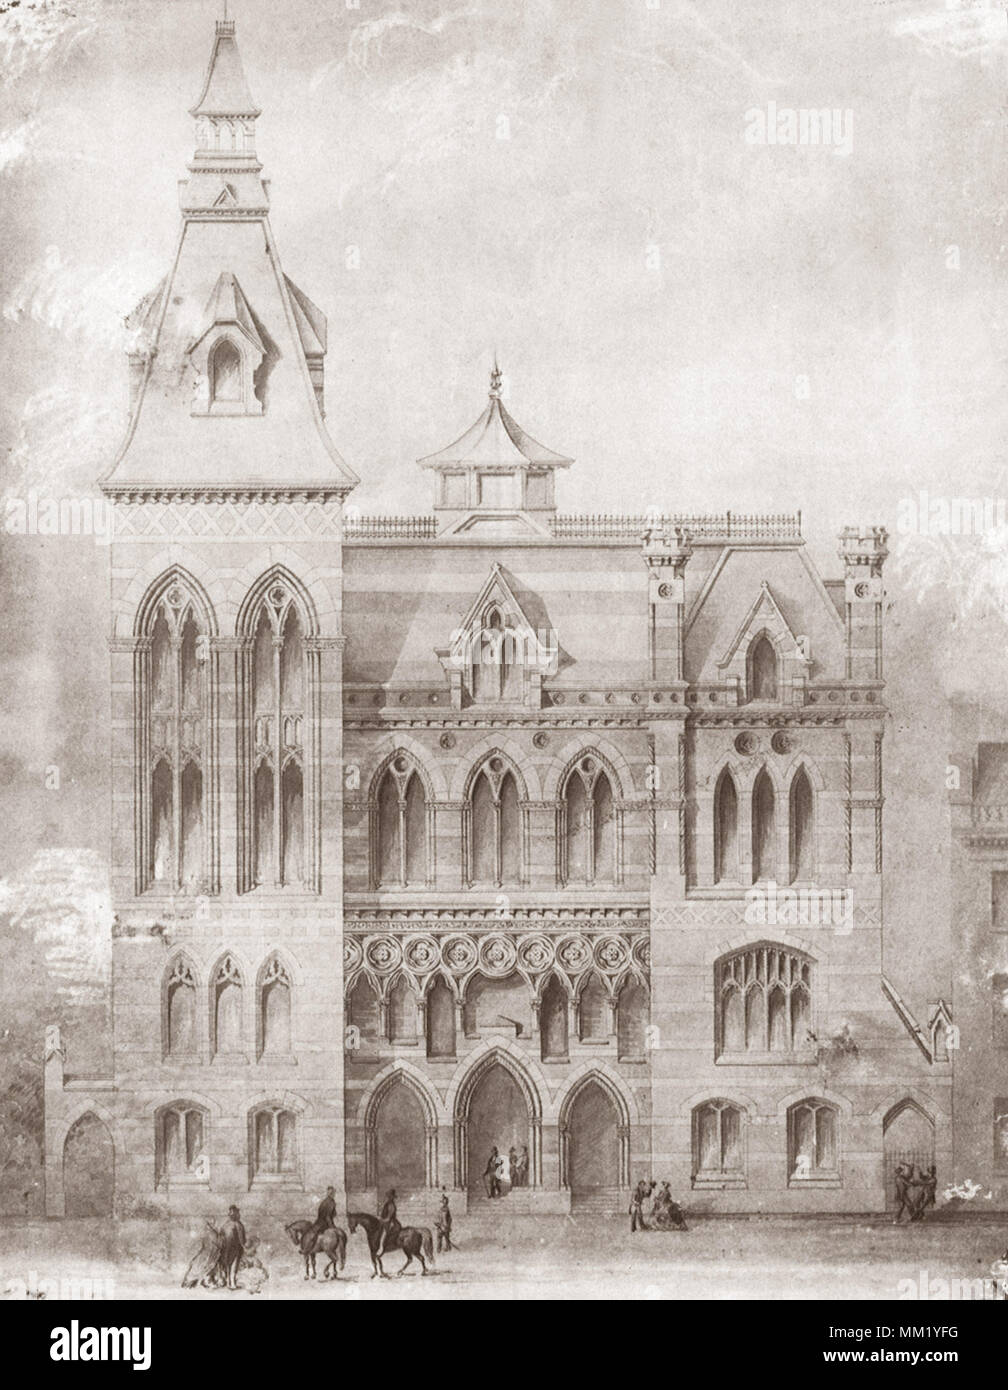 High Victorian Gothic City Hall. New Haven. 1870 Stockfoto